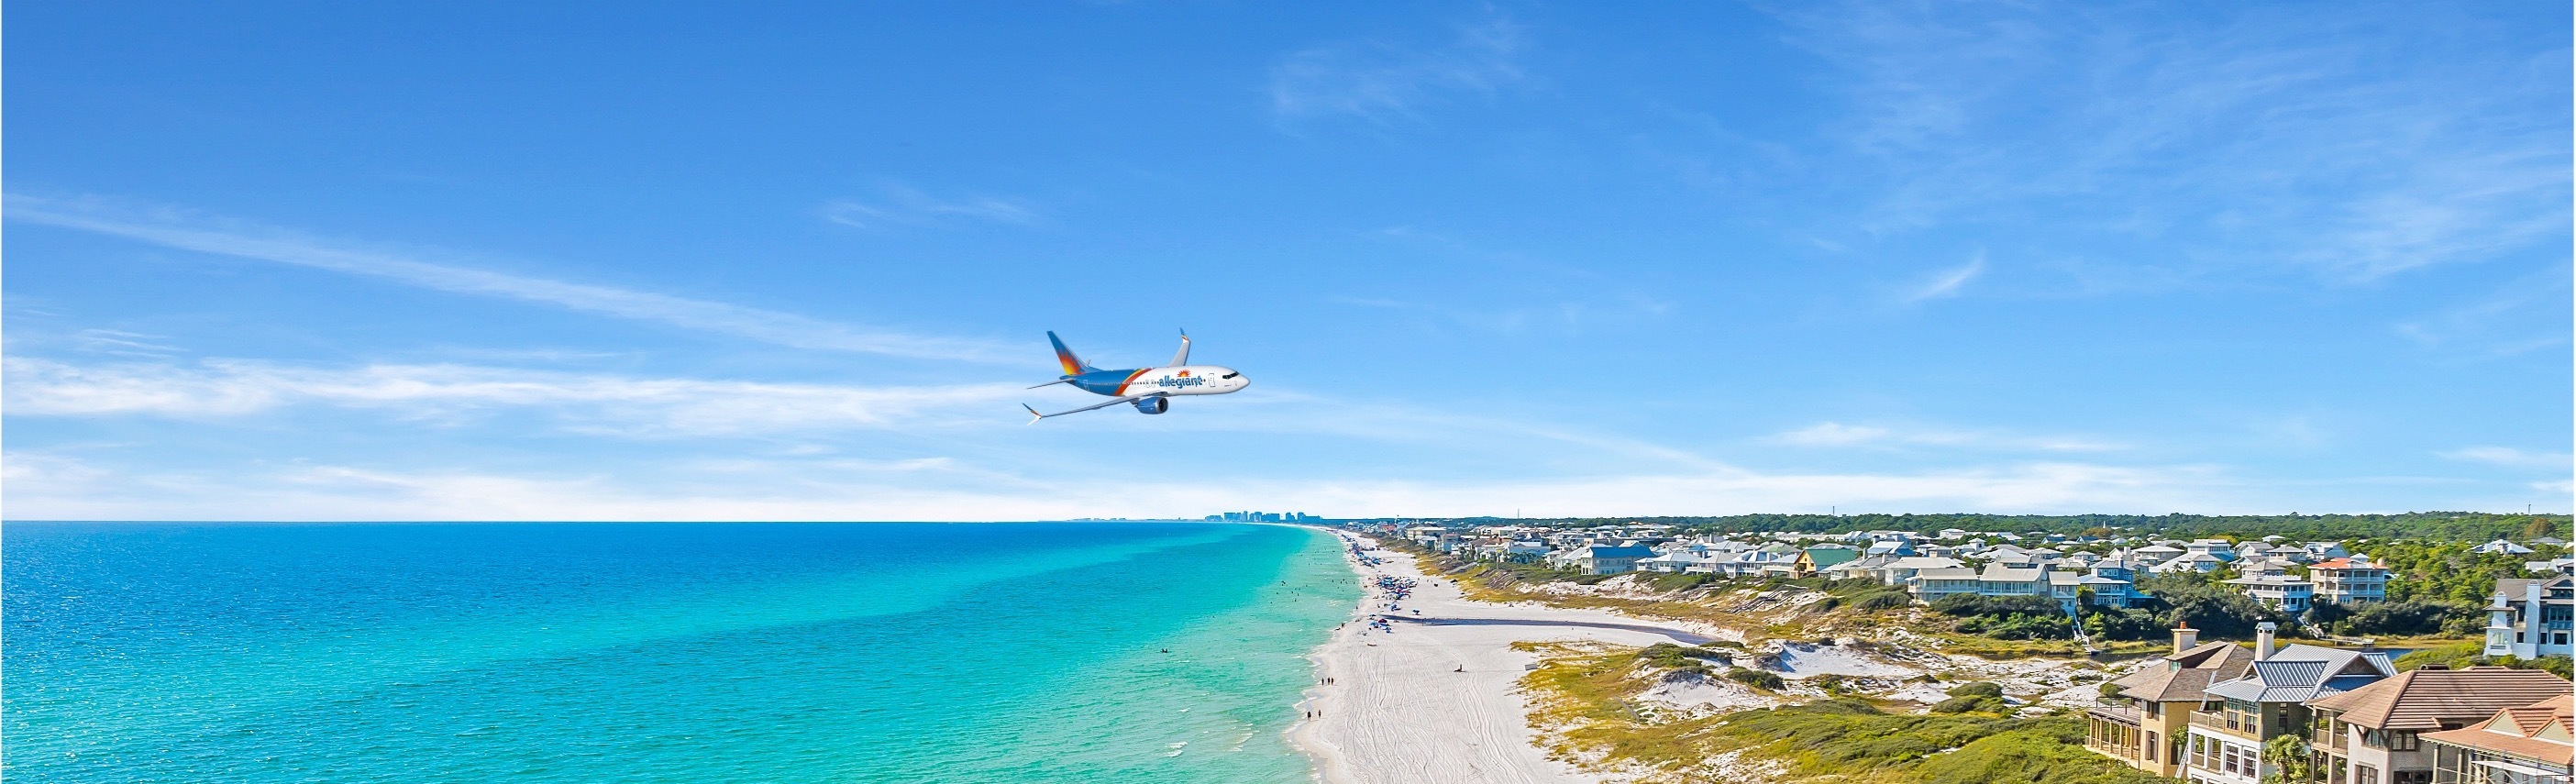 An airplane flying over coastal water 